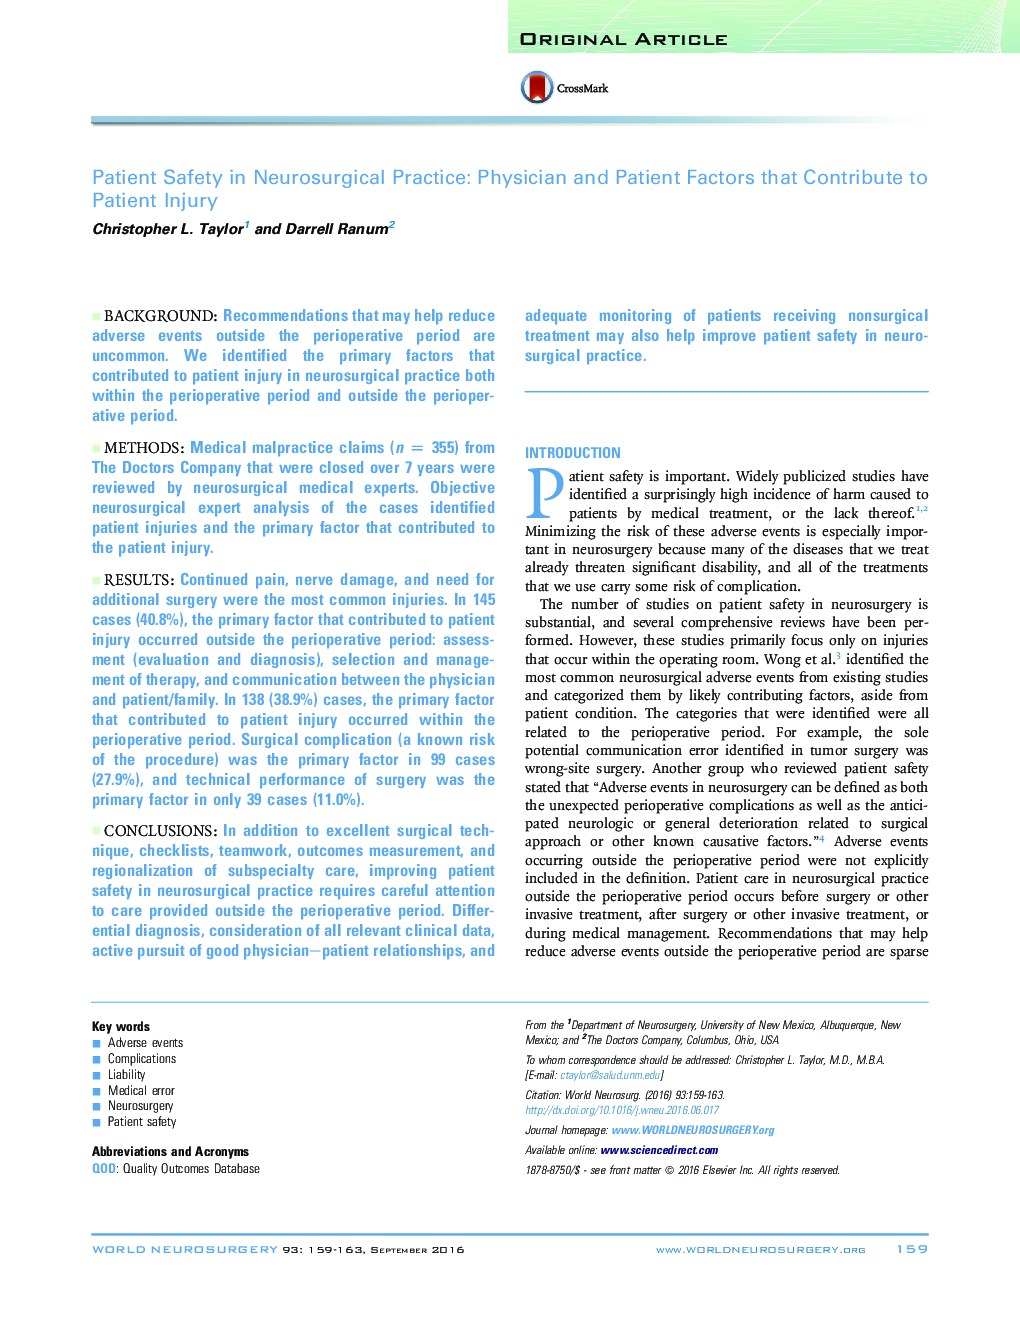 Patient Safety in Neurosurgical Practice: Physician and Patient Factors that Contribute to Patient Injury